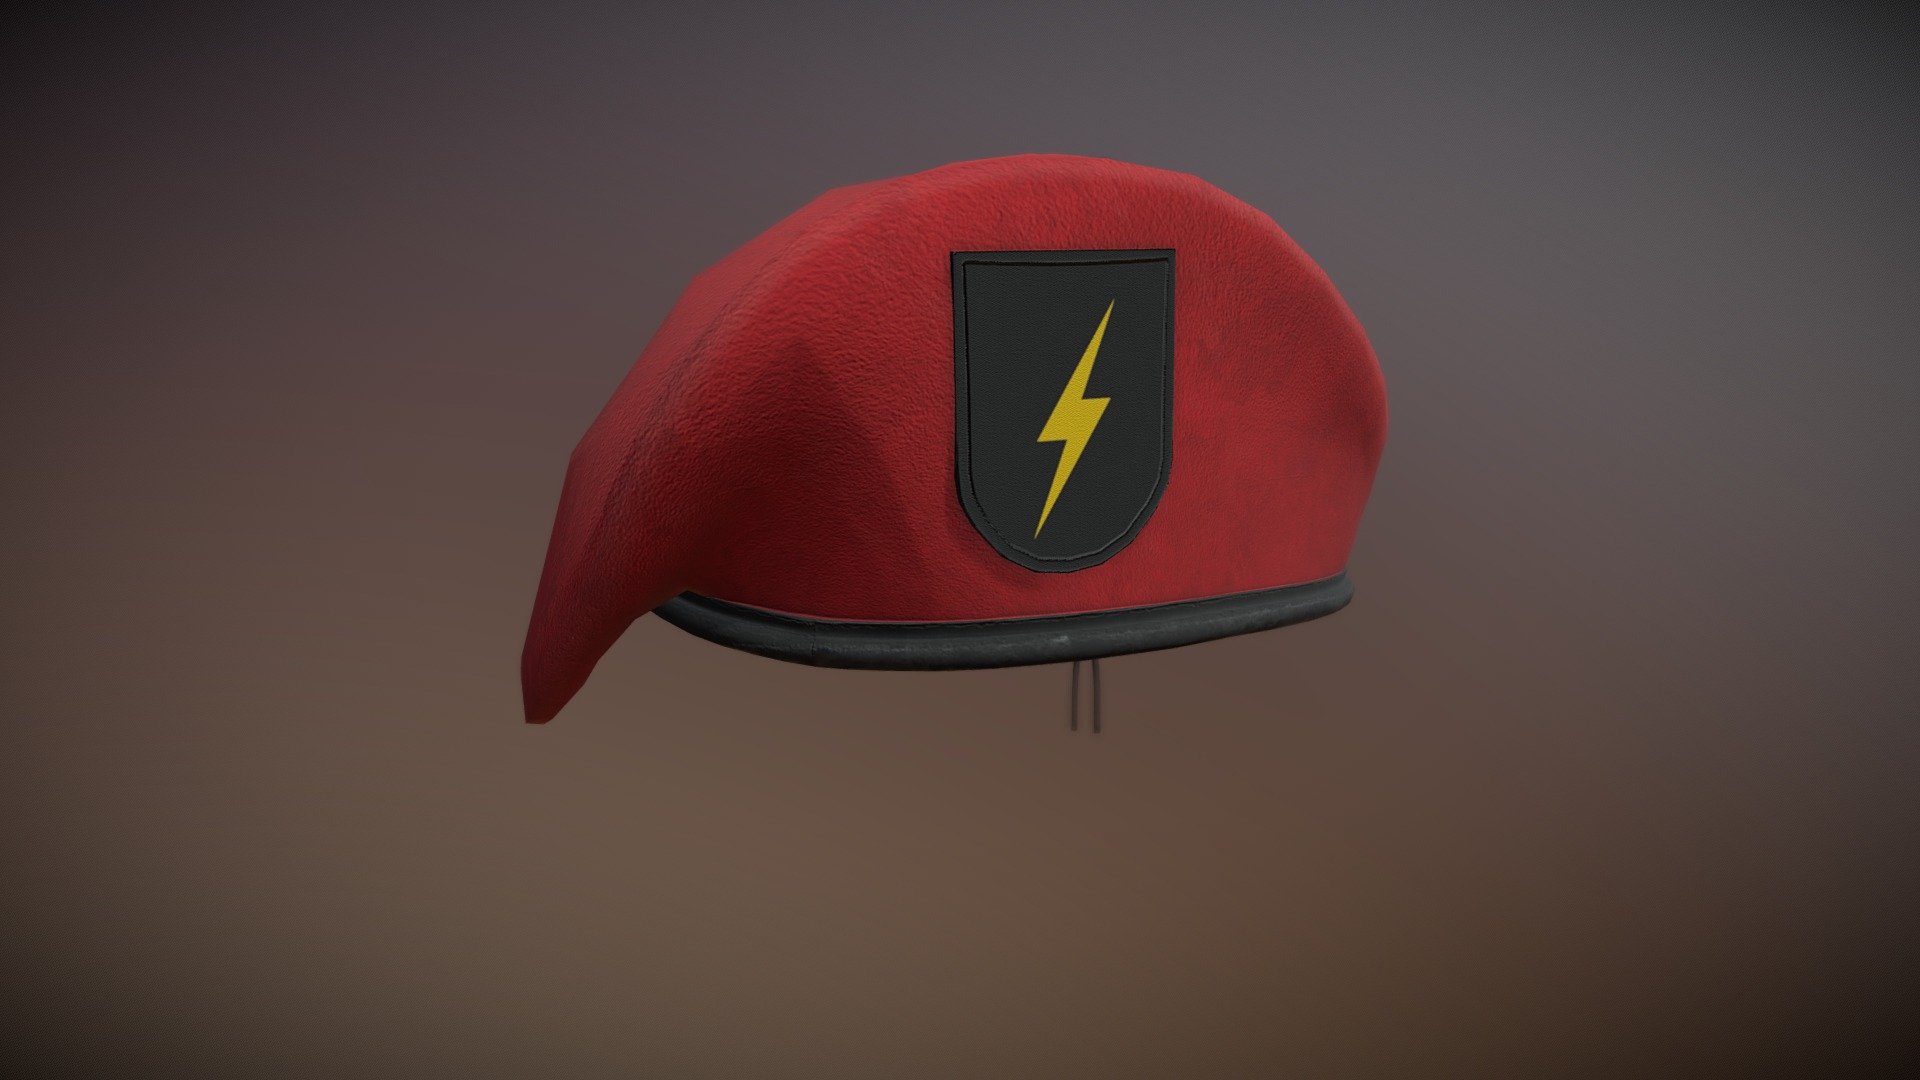 Military Red Beret of Army Special Forces